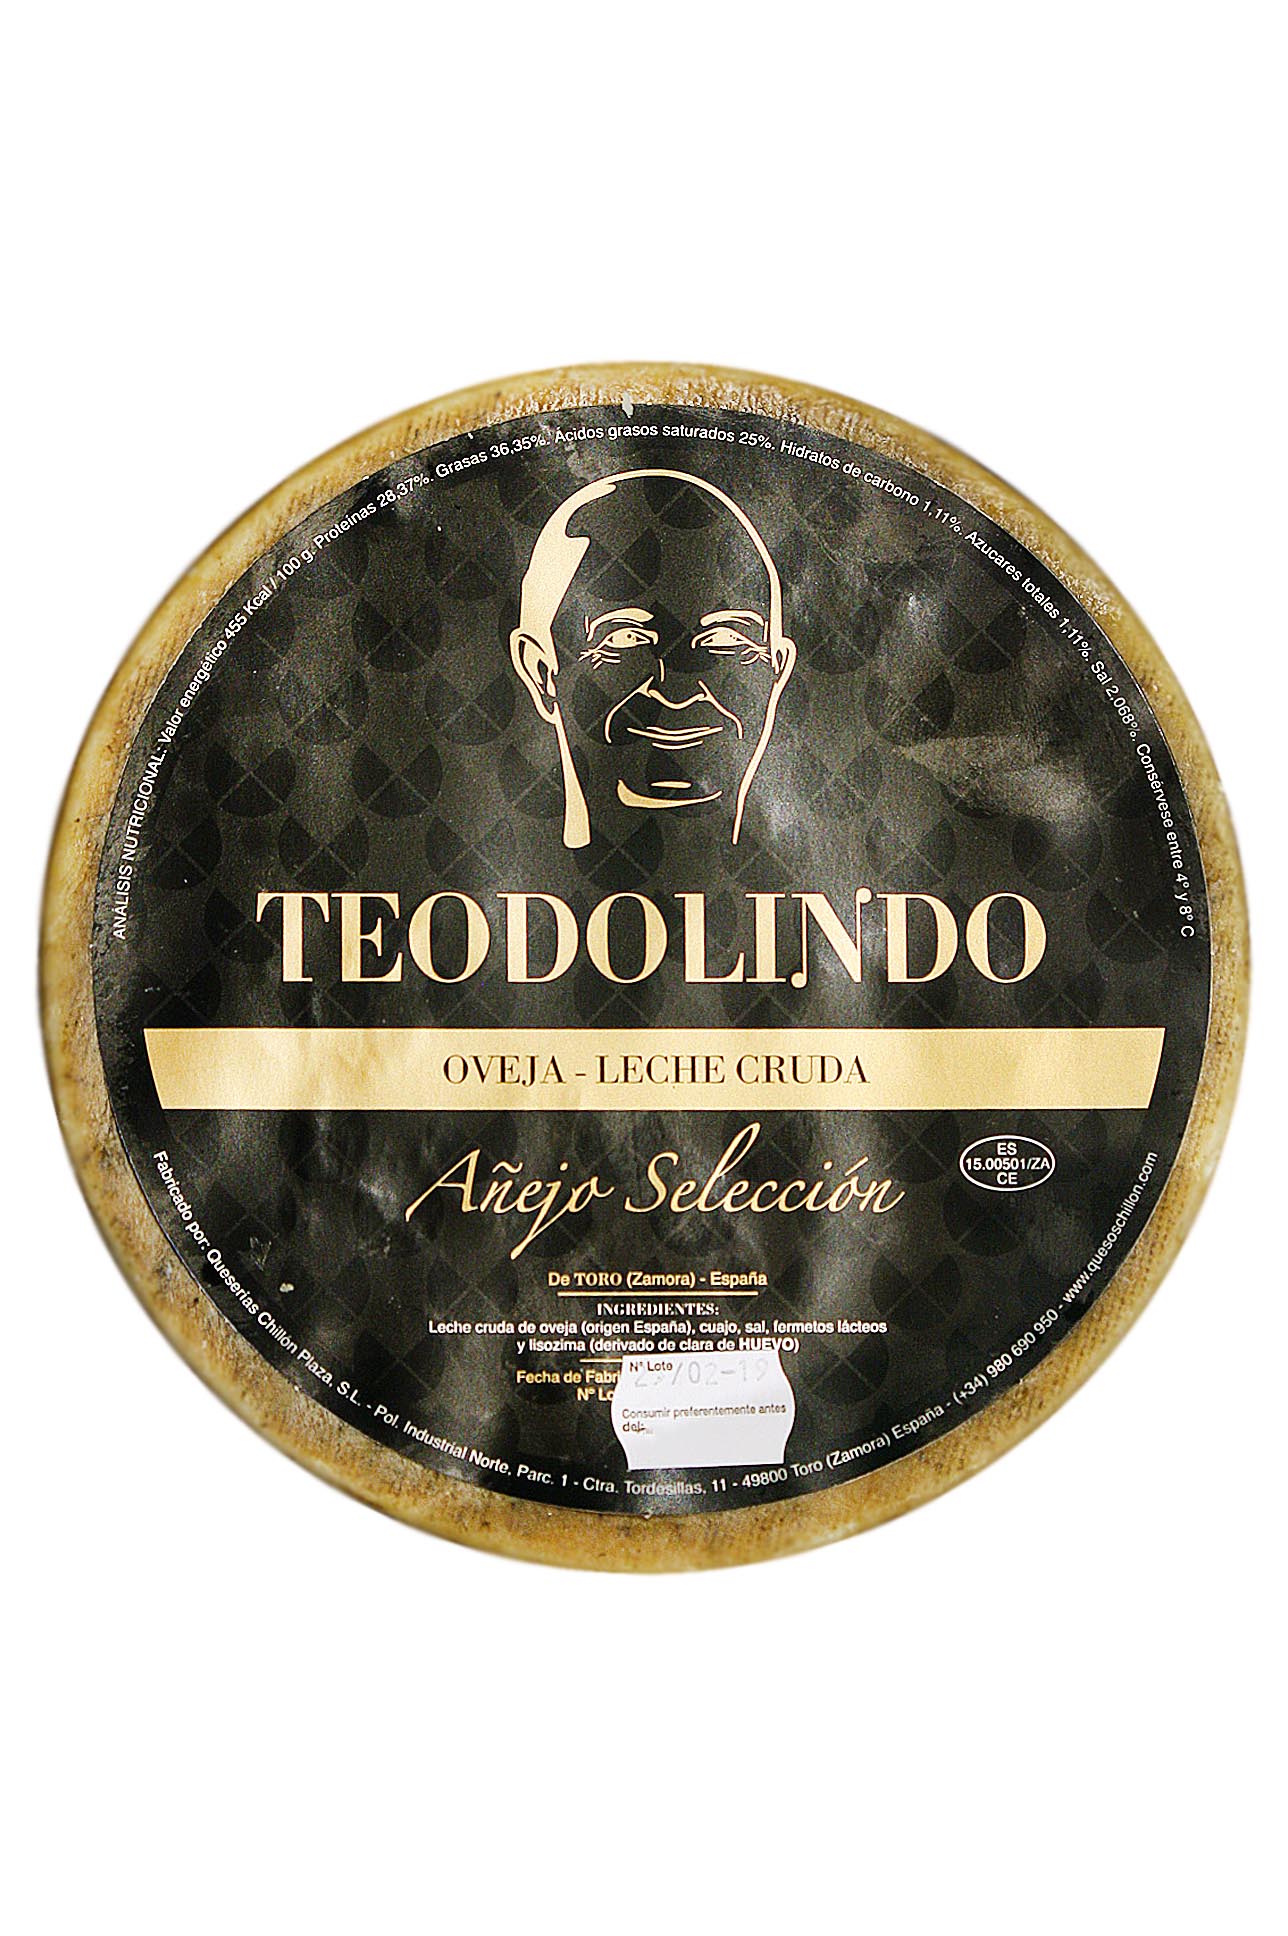 Todolindo cheese